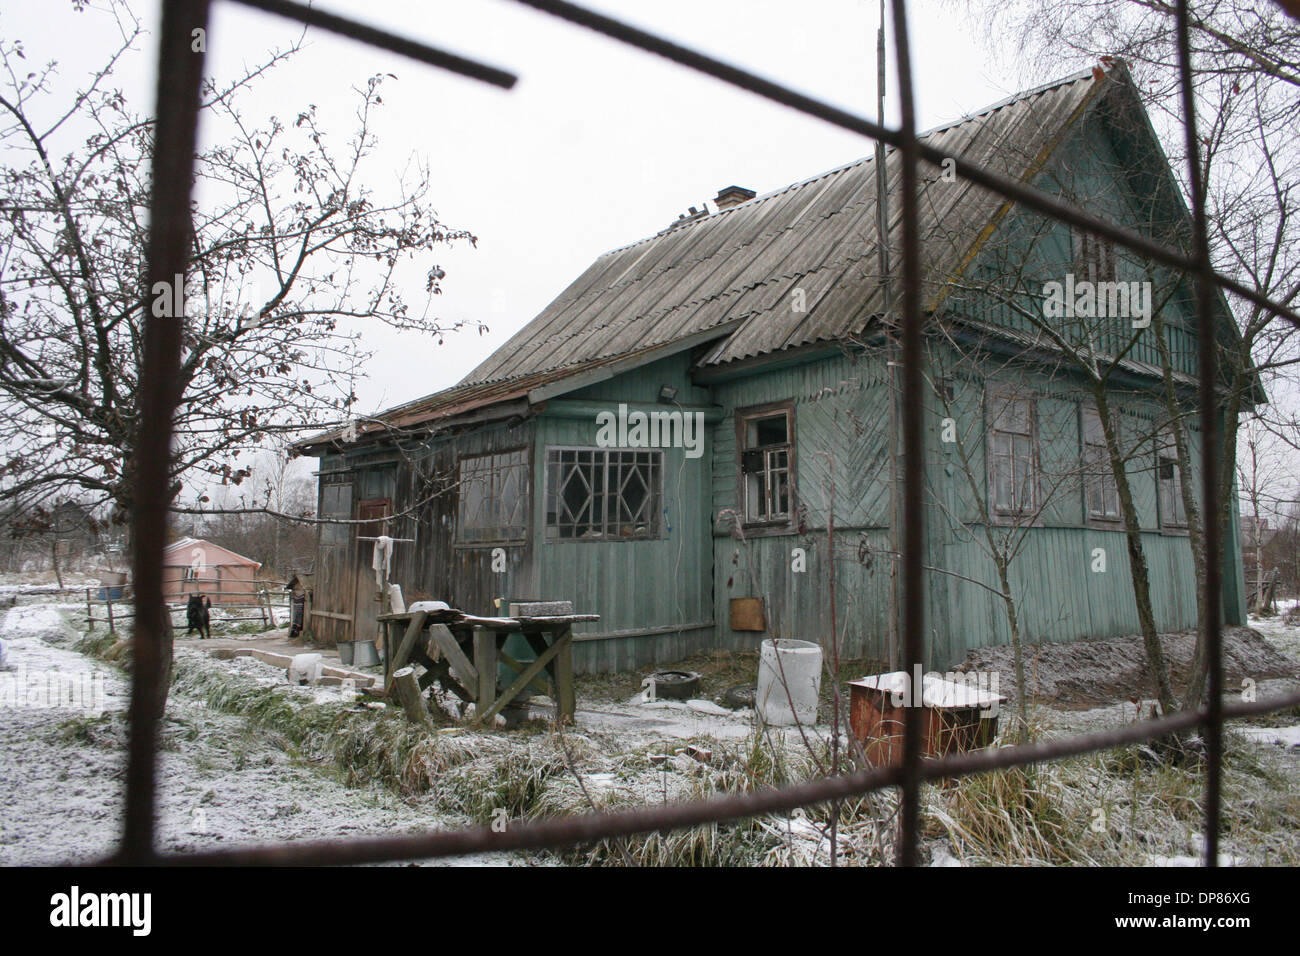 Sep 28, 2006 - Tosno, Russia - Country house (Dacha) that belonged to the parents of Russian president Vladimir Putin. The Dacha is located in Tosno area of Leningrad region. (Credit Image: © PhotoXpress/ZUMA Press) Stock Photo